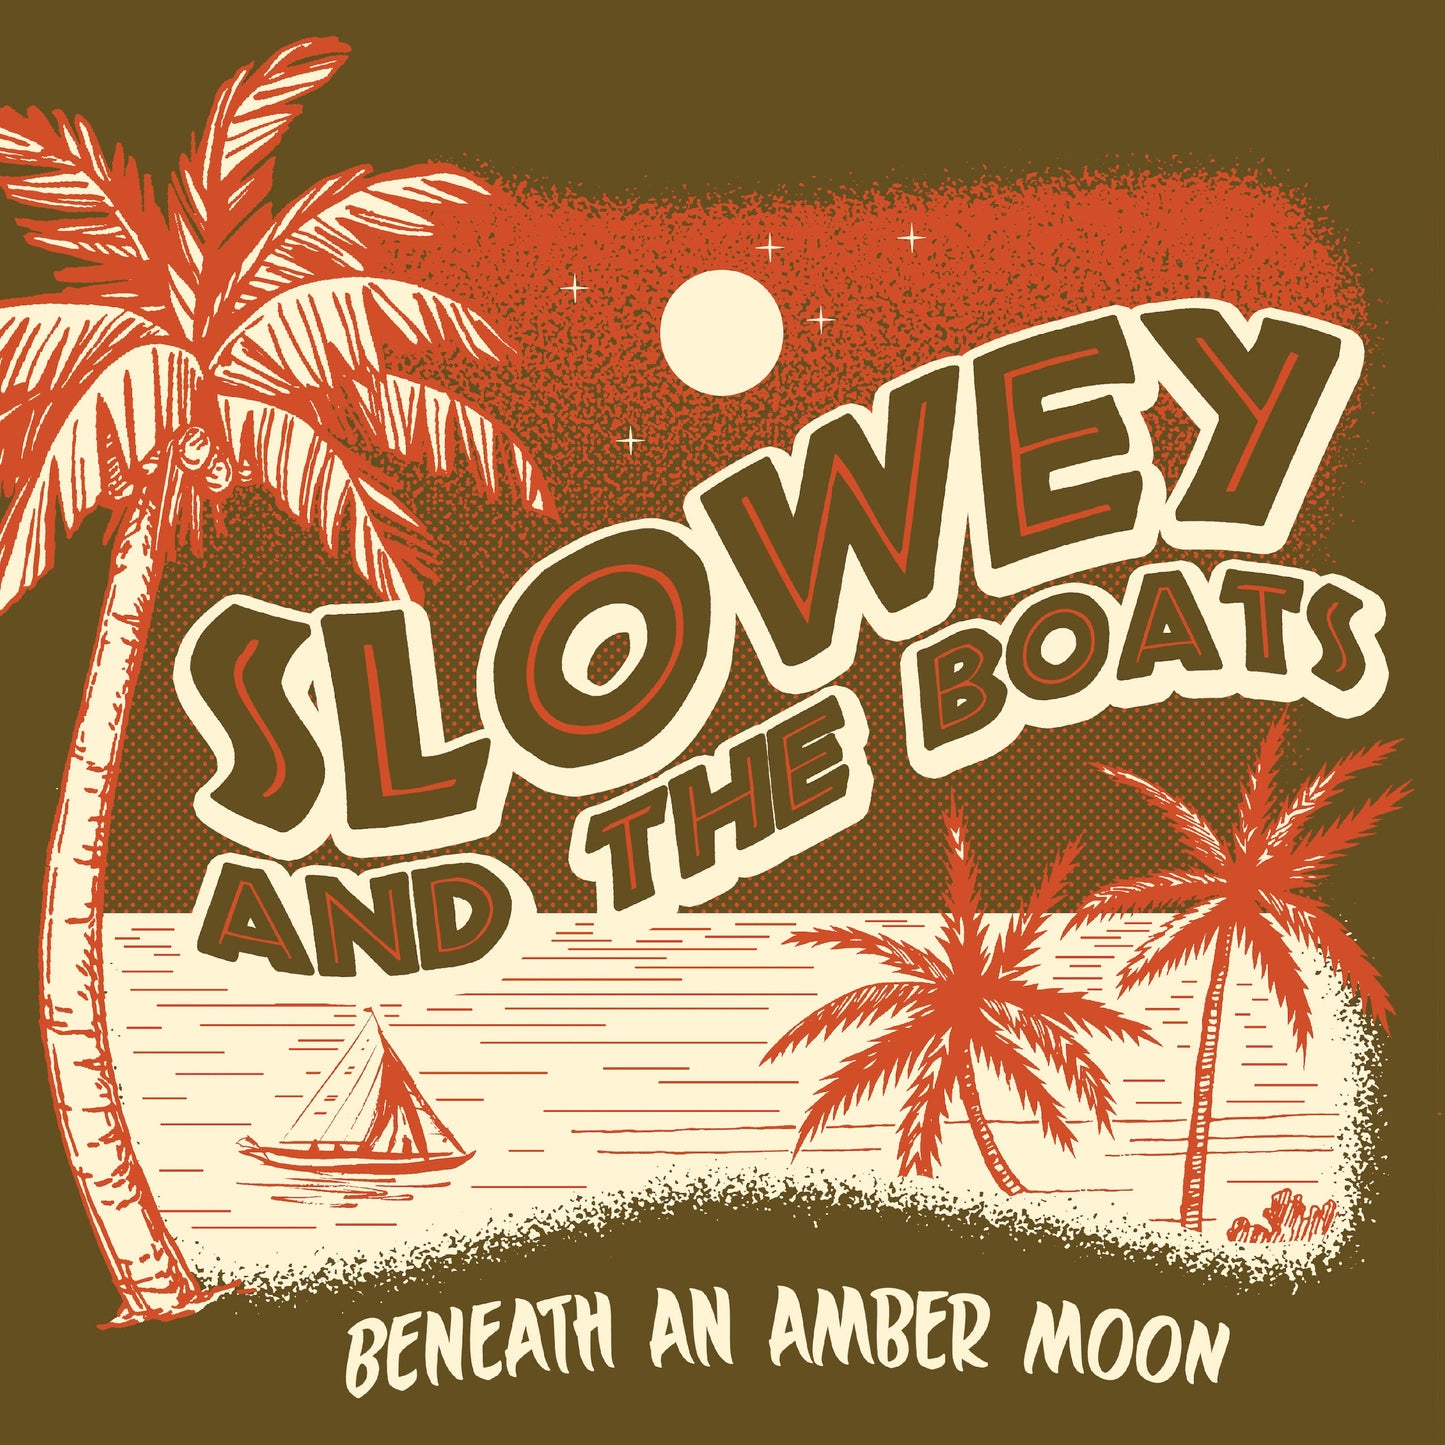 Slowey and The Boats "Beneath an Amber Moon" LP